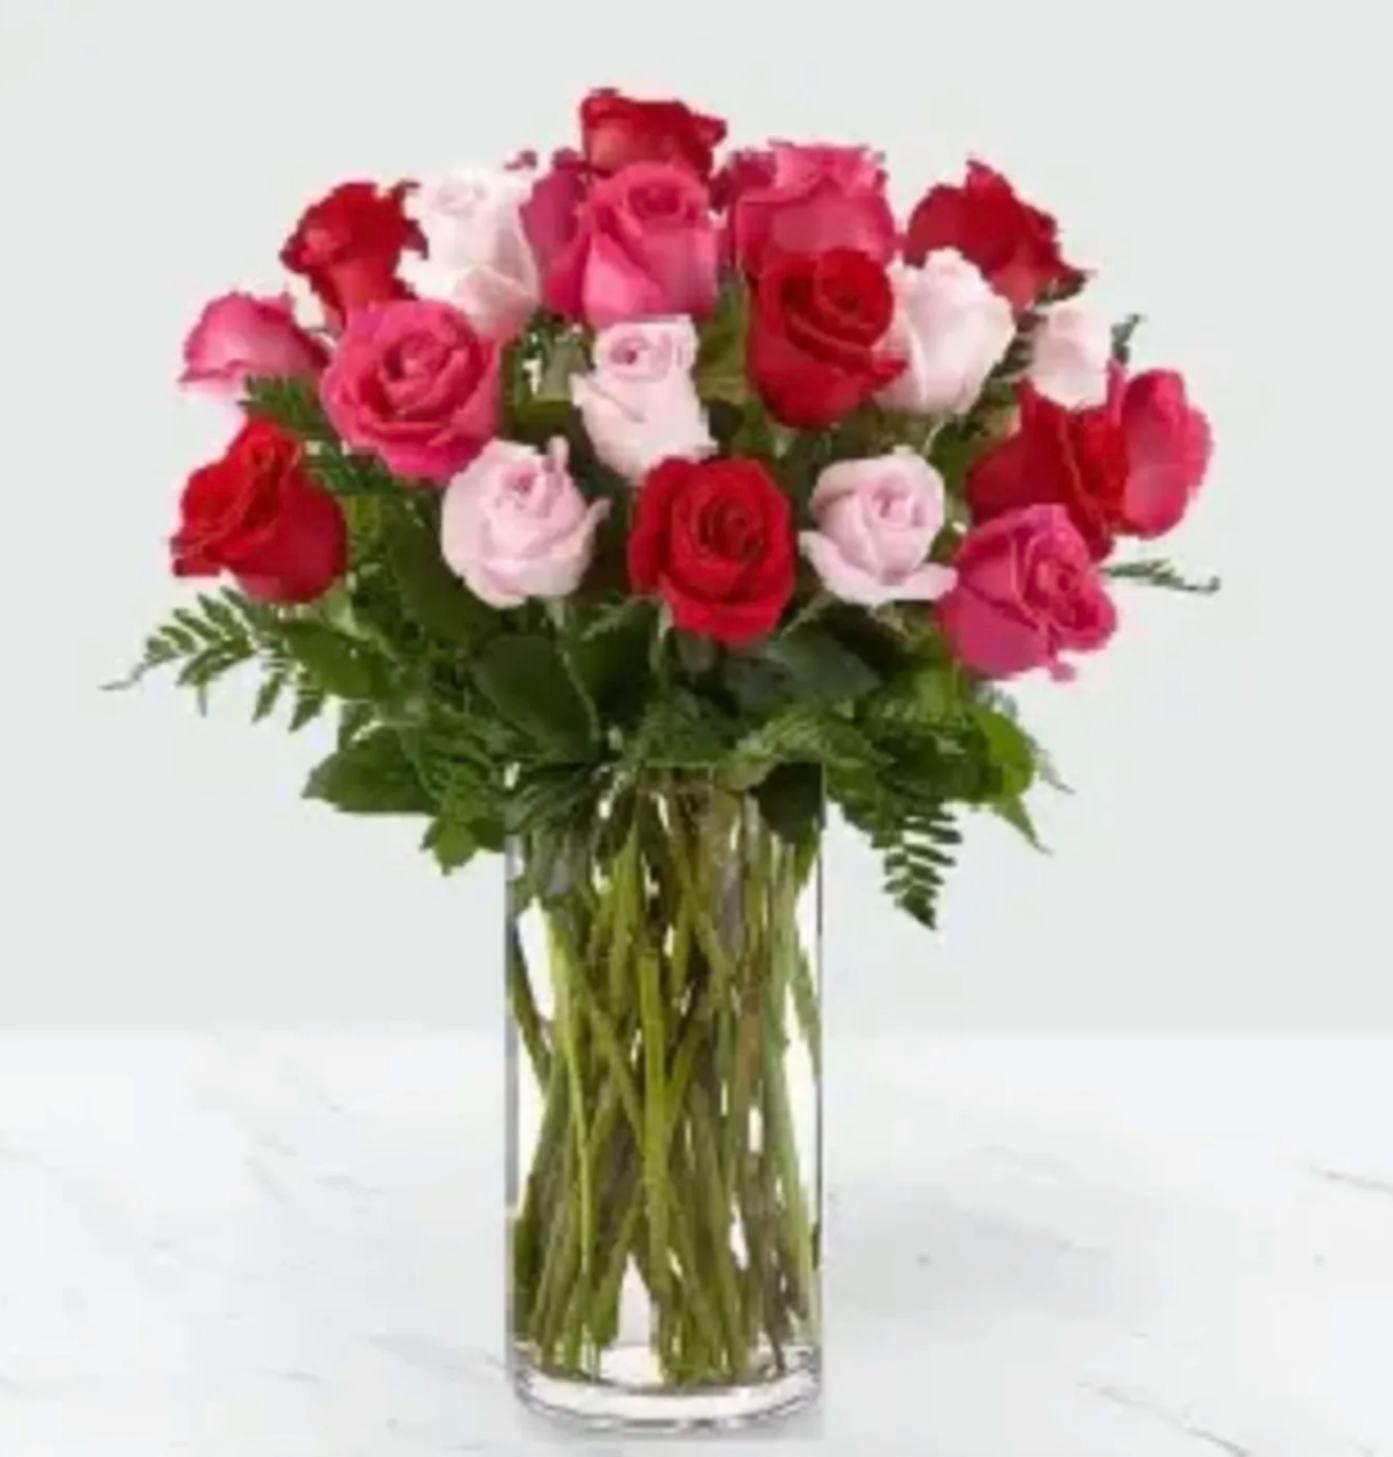 Rose Colored Love 24 - It's all in the name. This sweet arrangement is a soft and feminine combination of roses in three stunning shades. Each pink, hot pink and red bloom in our Rose Colored Love Bouquet is perfect for sending affection to a significant other or surprising a loved one with a gorgeous Valentine.